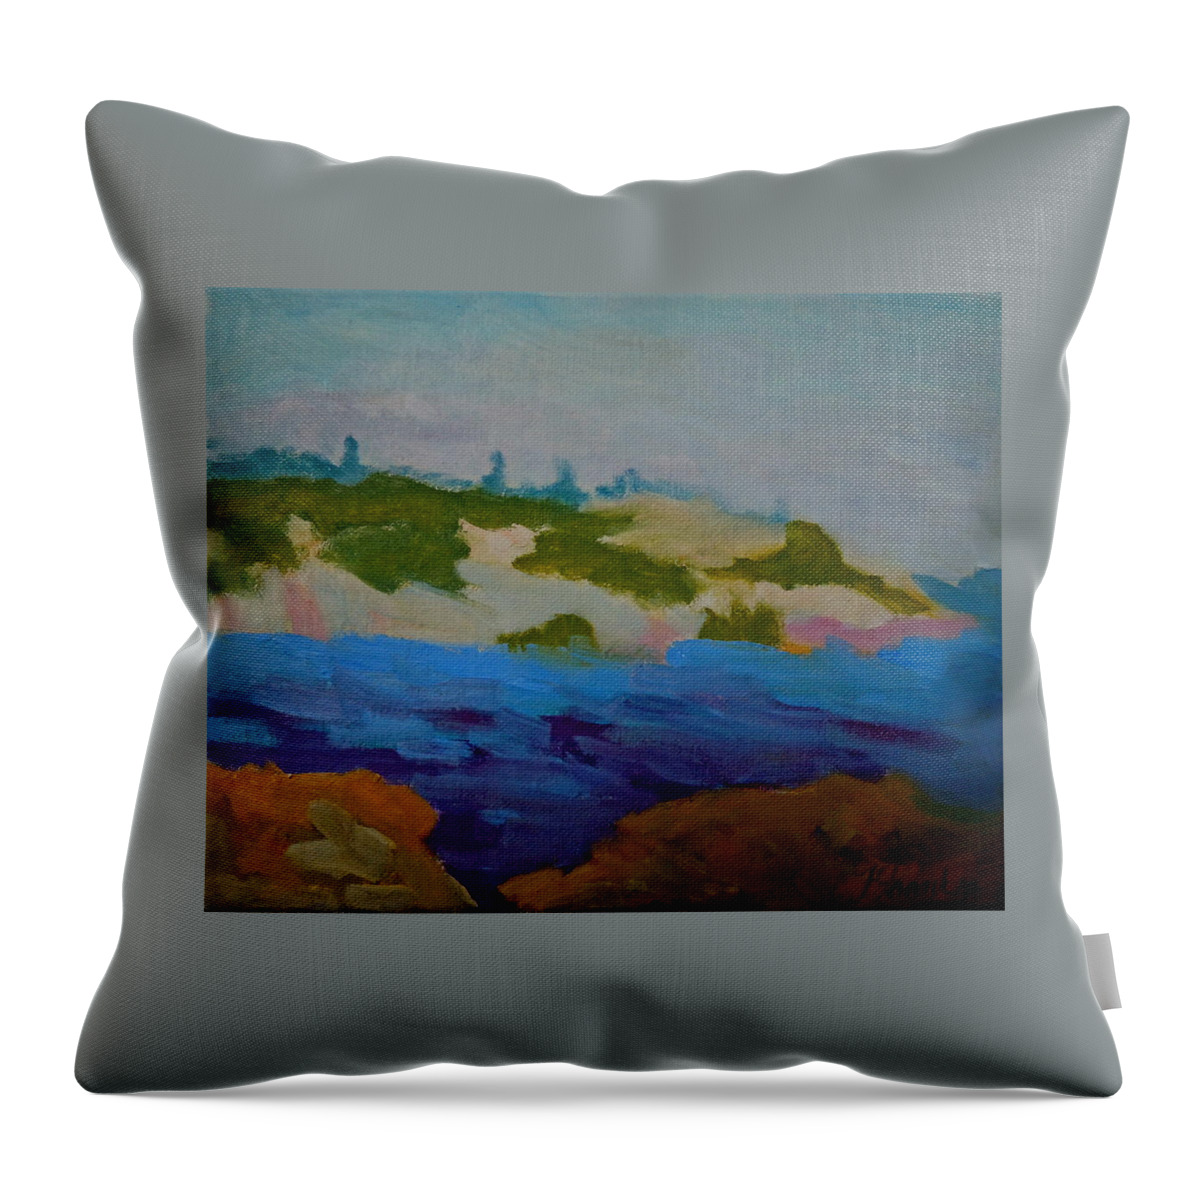 Island Throw Pillow featuring the painting Moose Island - Schoodic Peninsula by Francine Frank